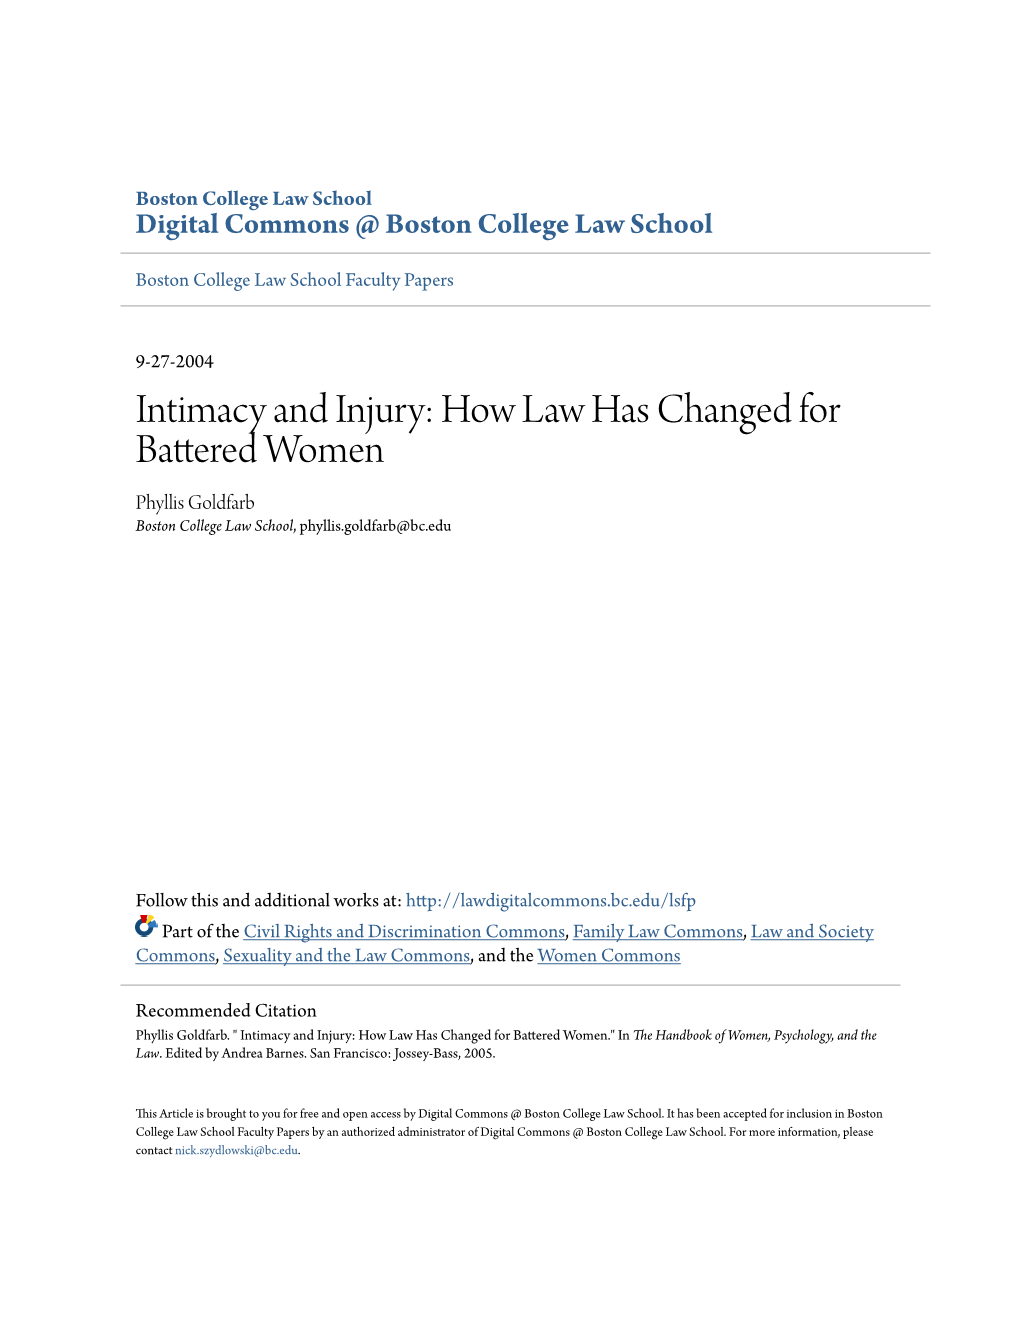 How Law Has Changed for Battered Women Phyllis Goldfarb Boston College Law School, Phyllis.Goldfarb@Bc.Edu